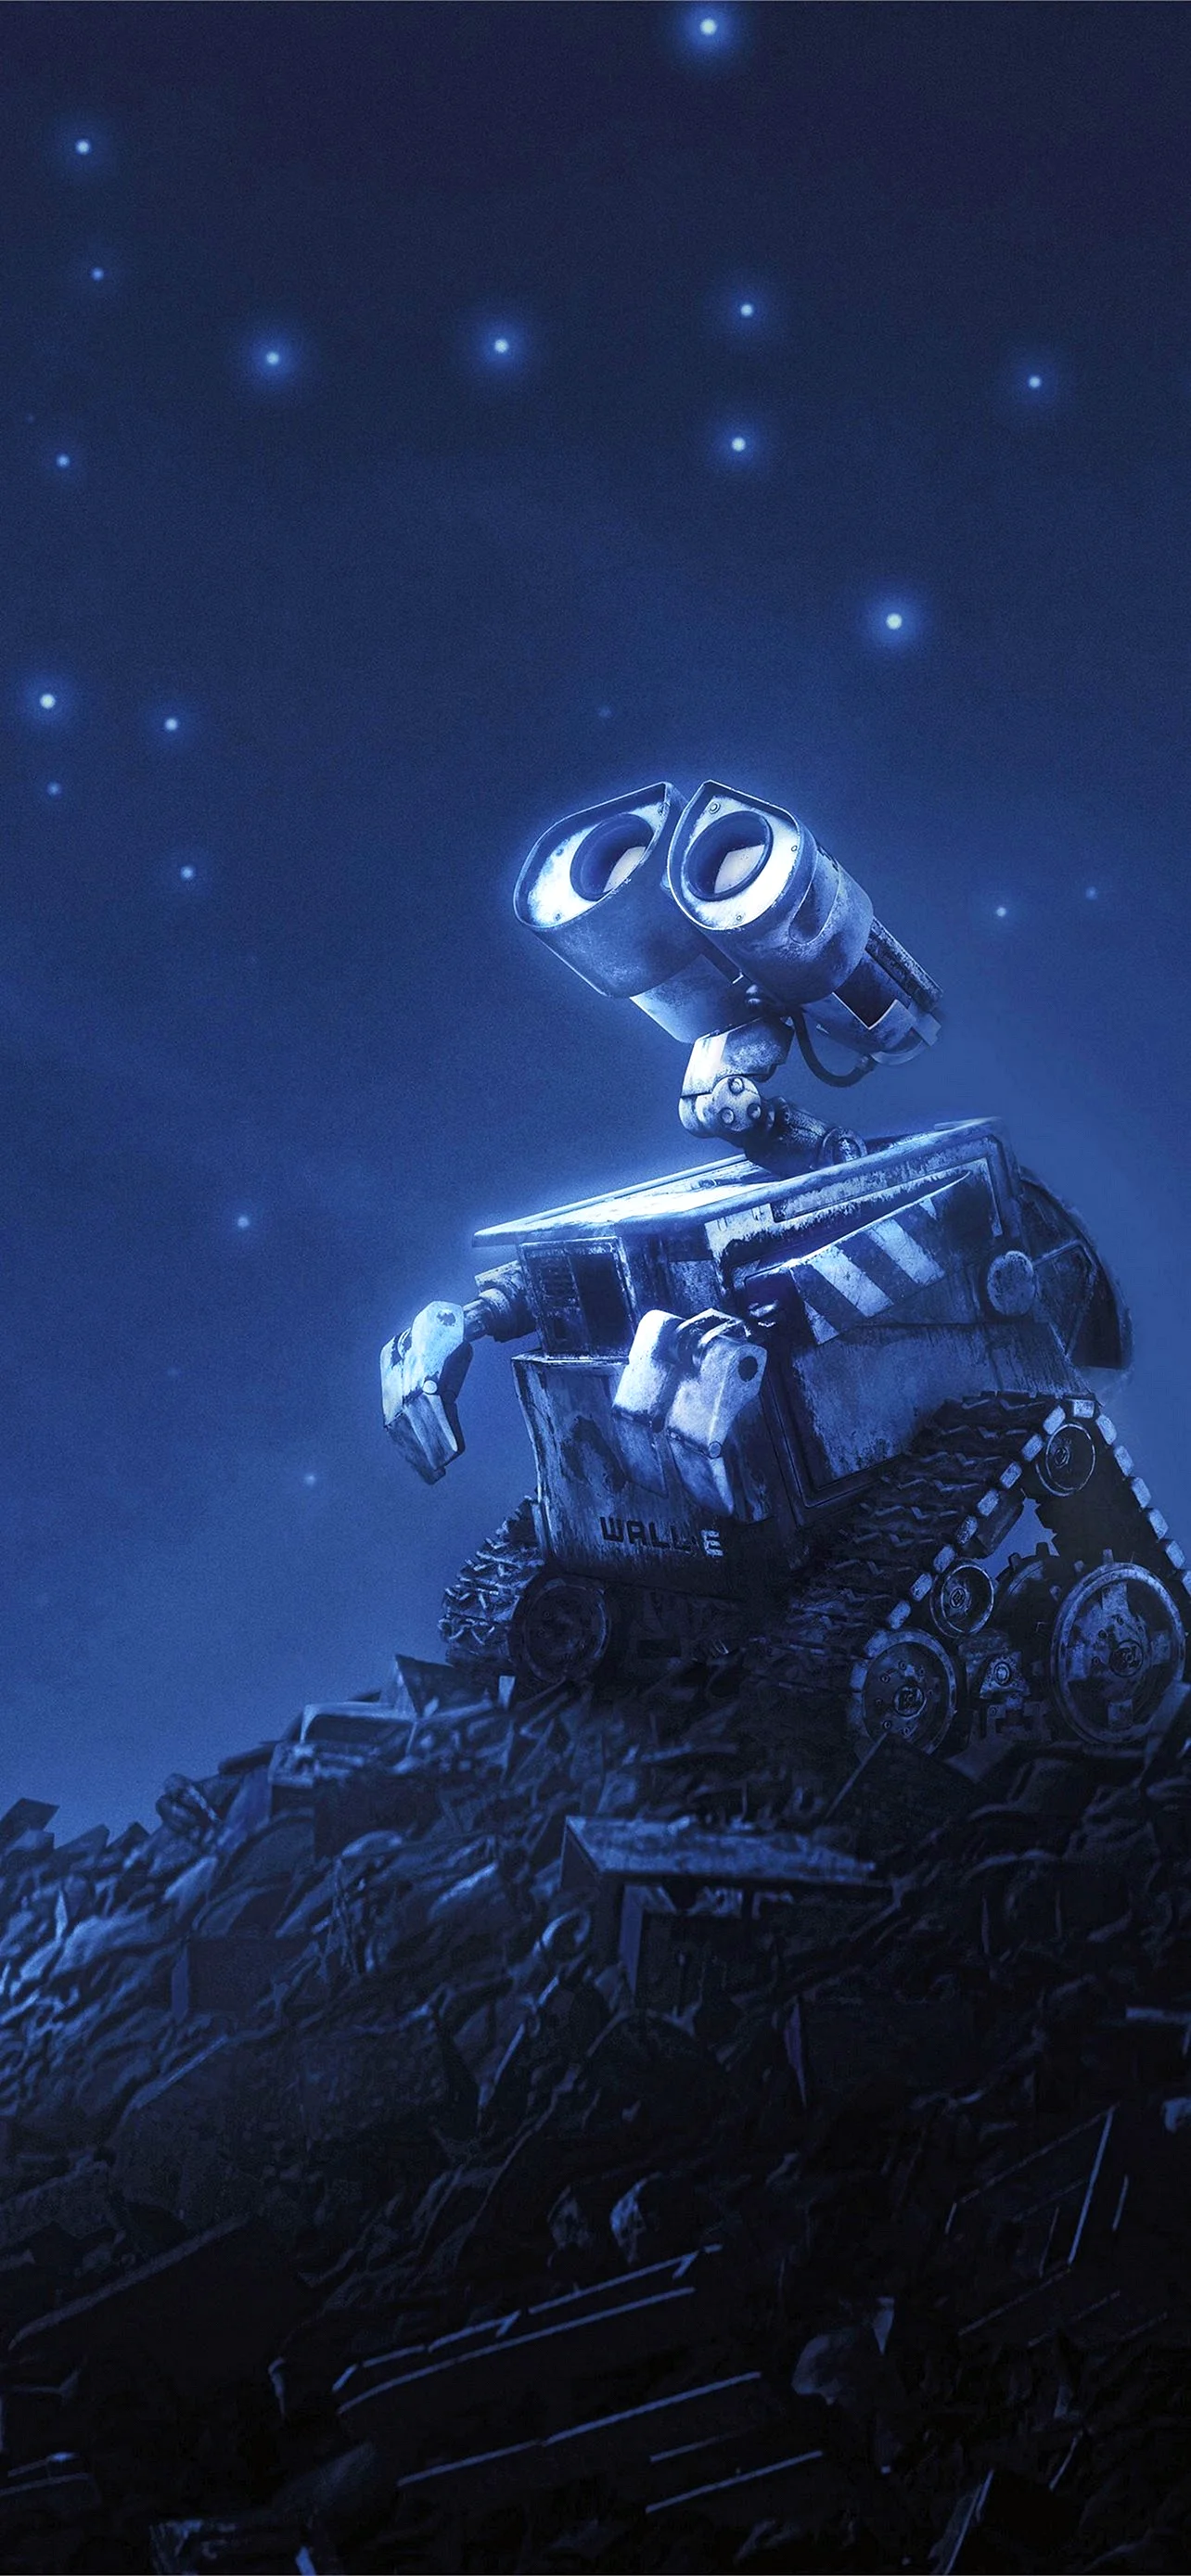 Wall-E 2008 Wallpaper for iPhone 13 Pro Max